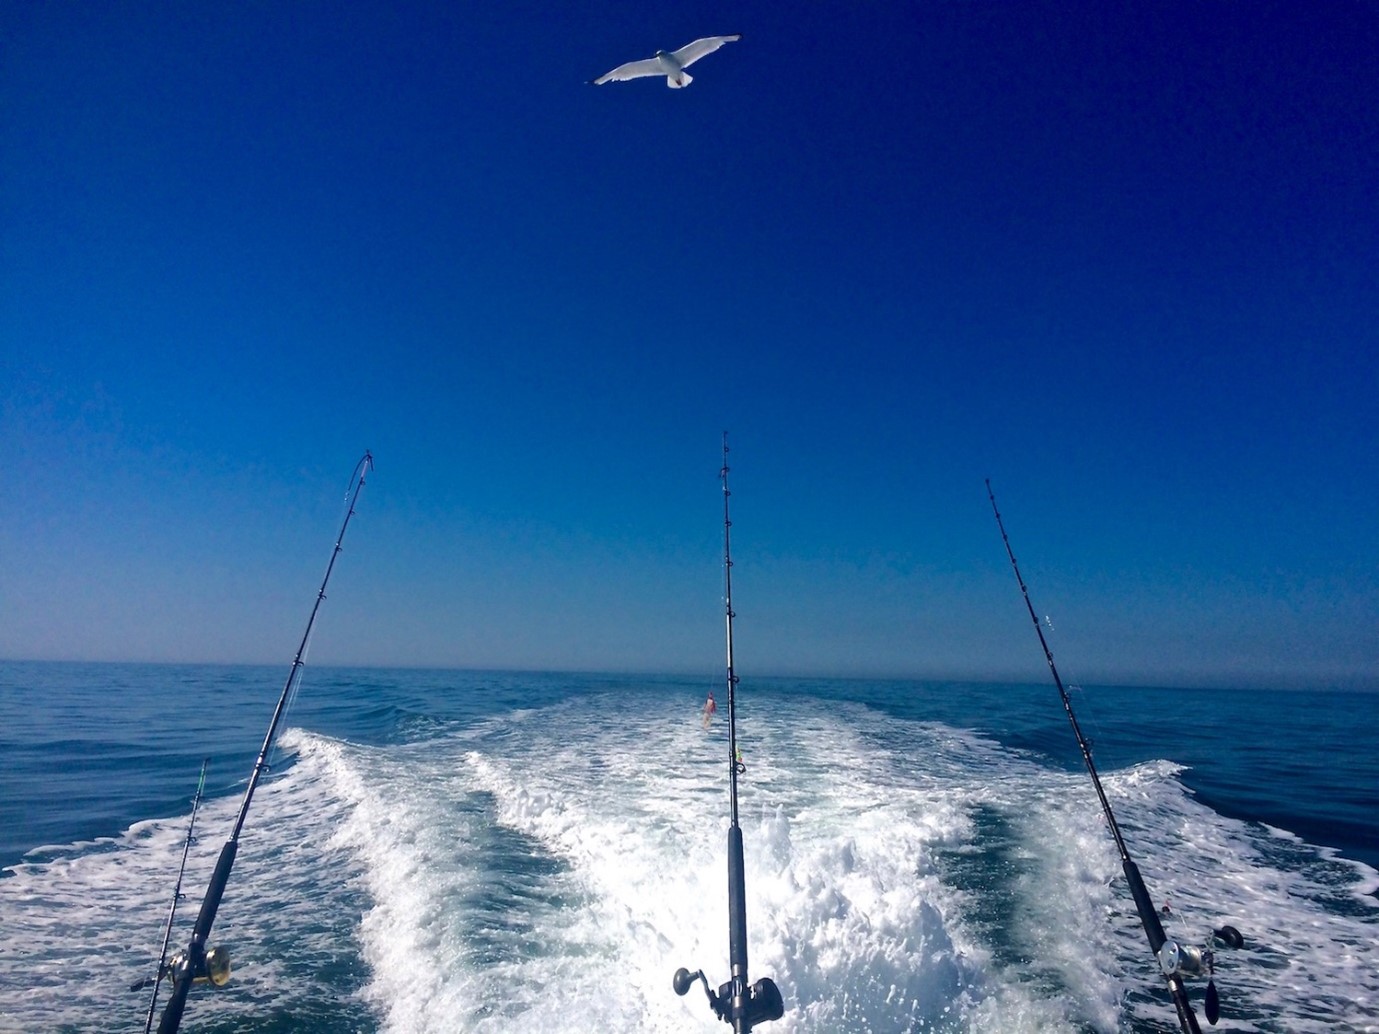 Private Fishing Trip – 6 hours